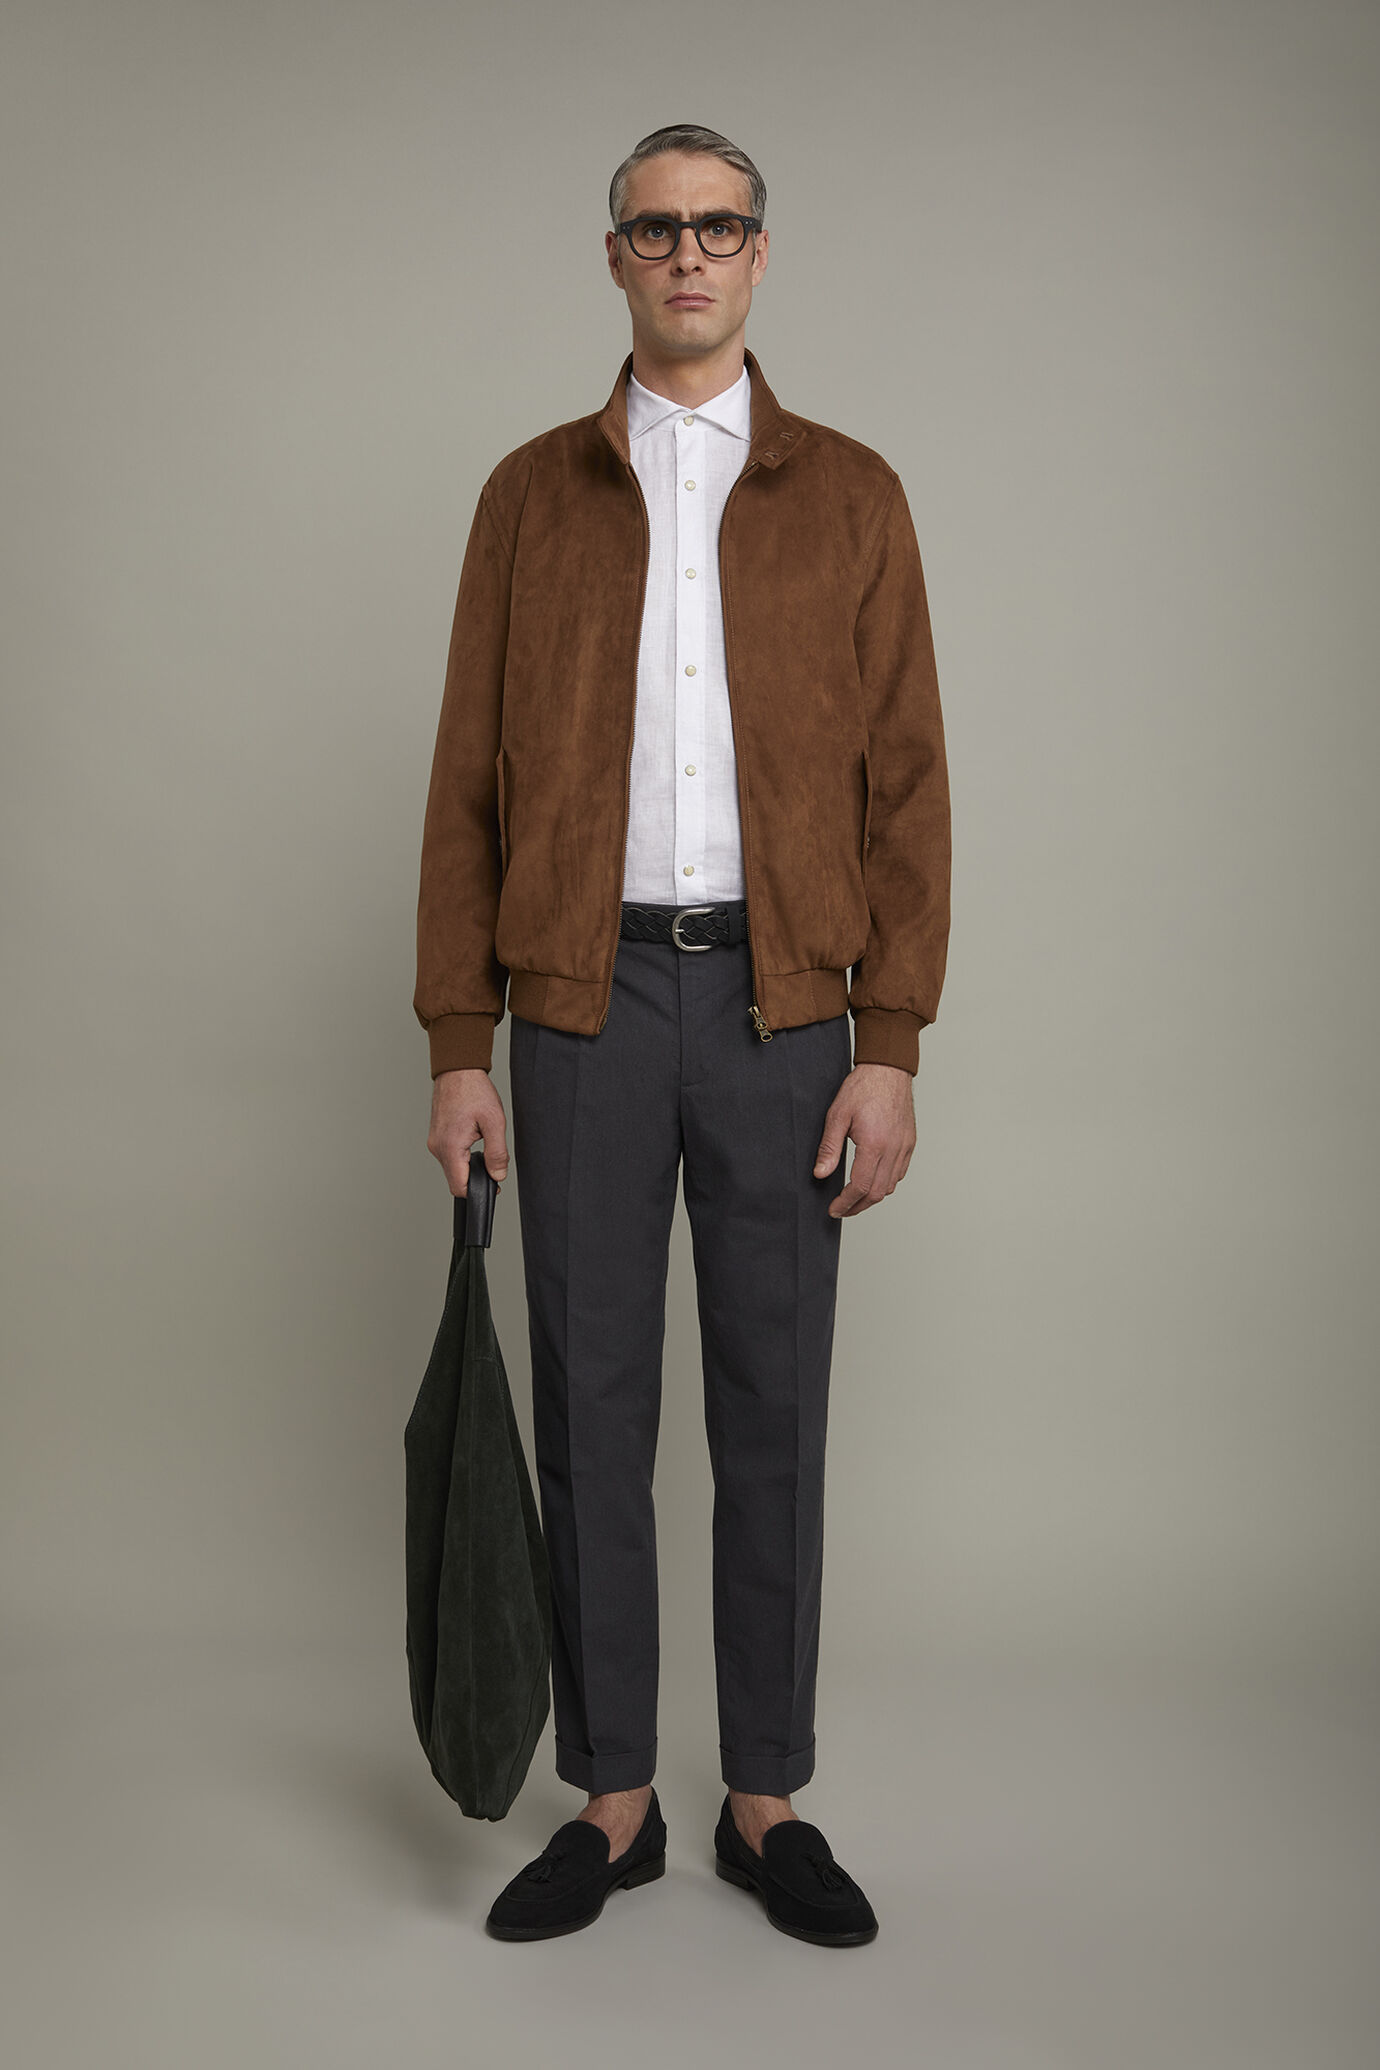 Men's unlined jacket with eco-suede fabric